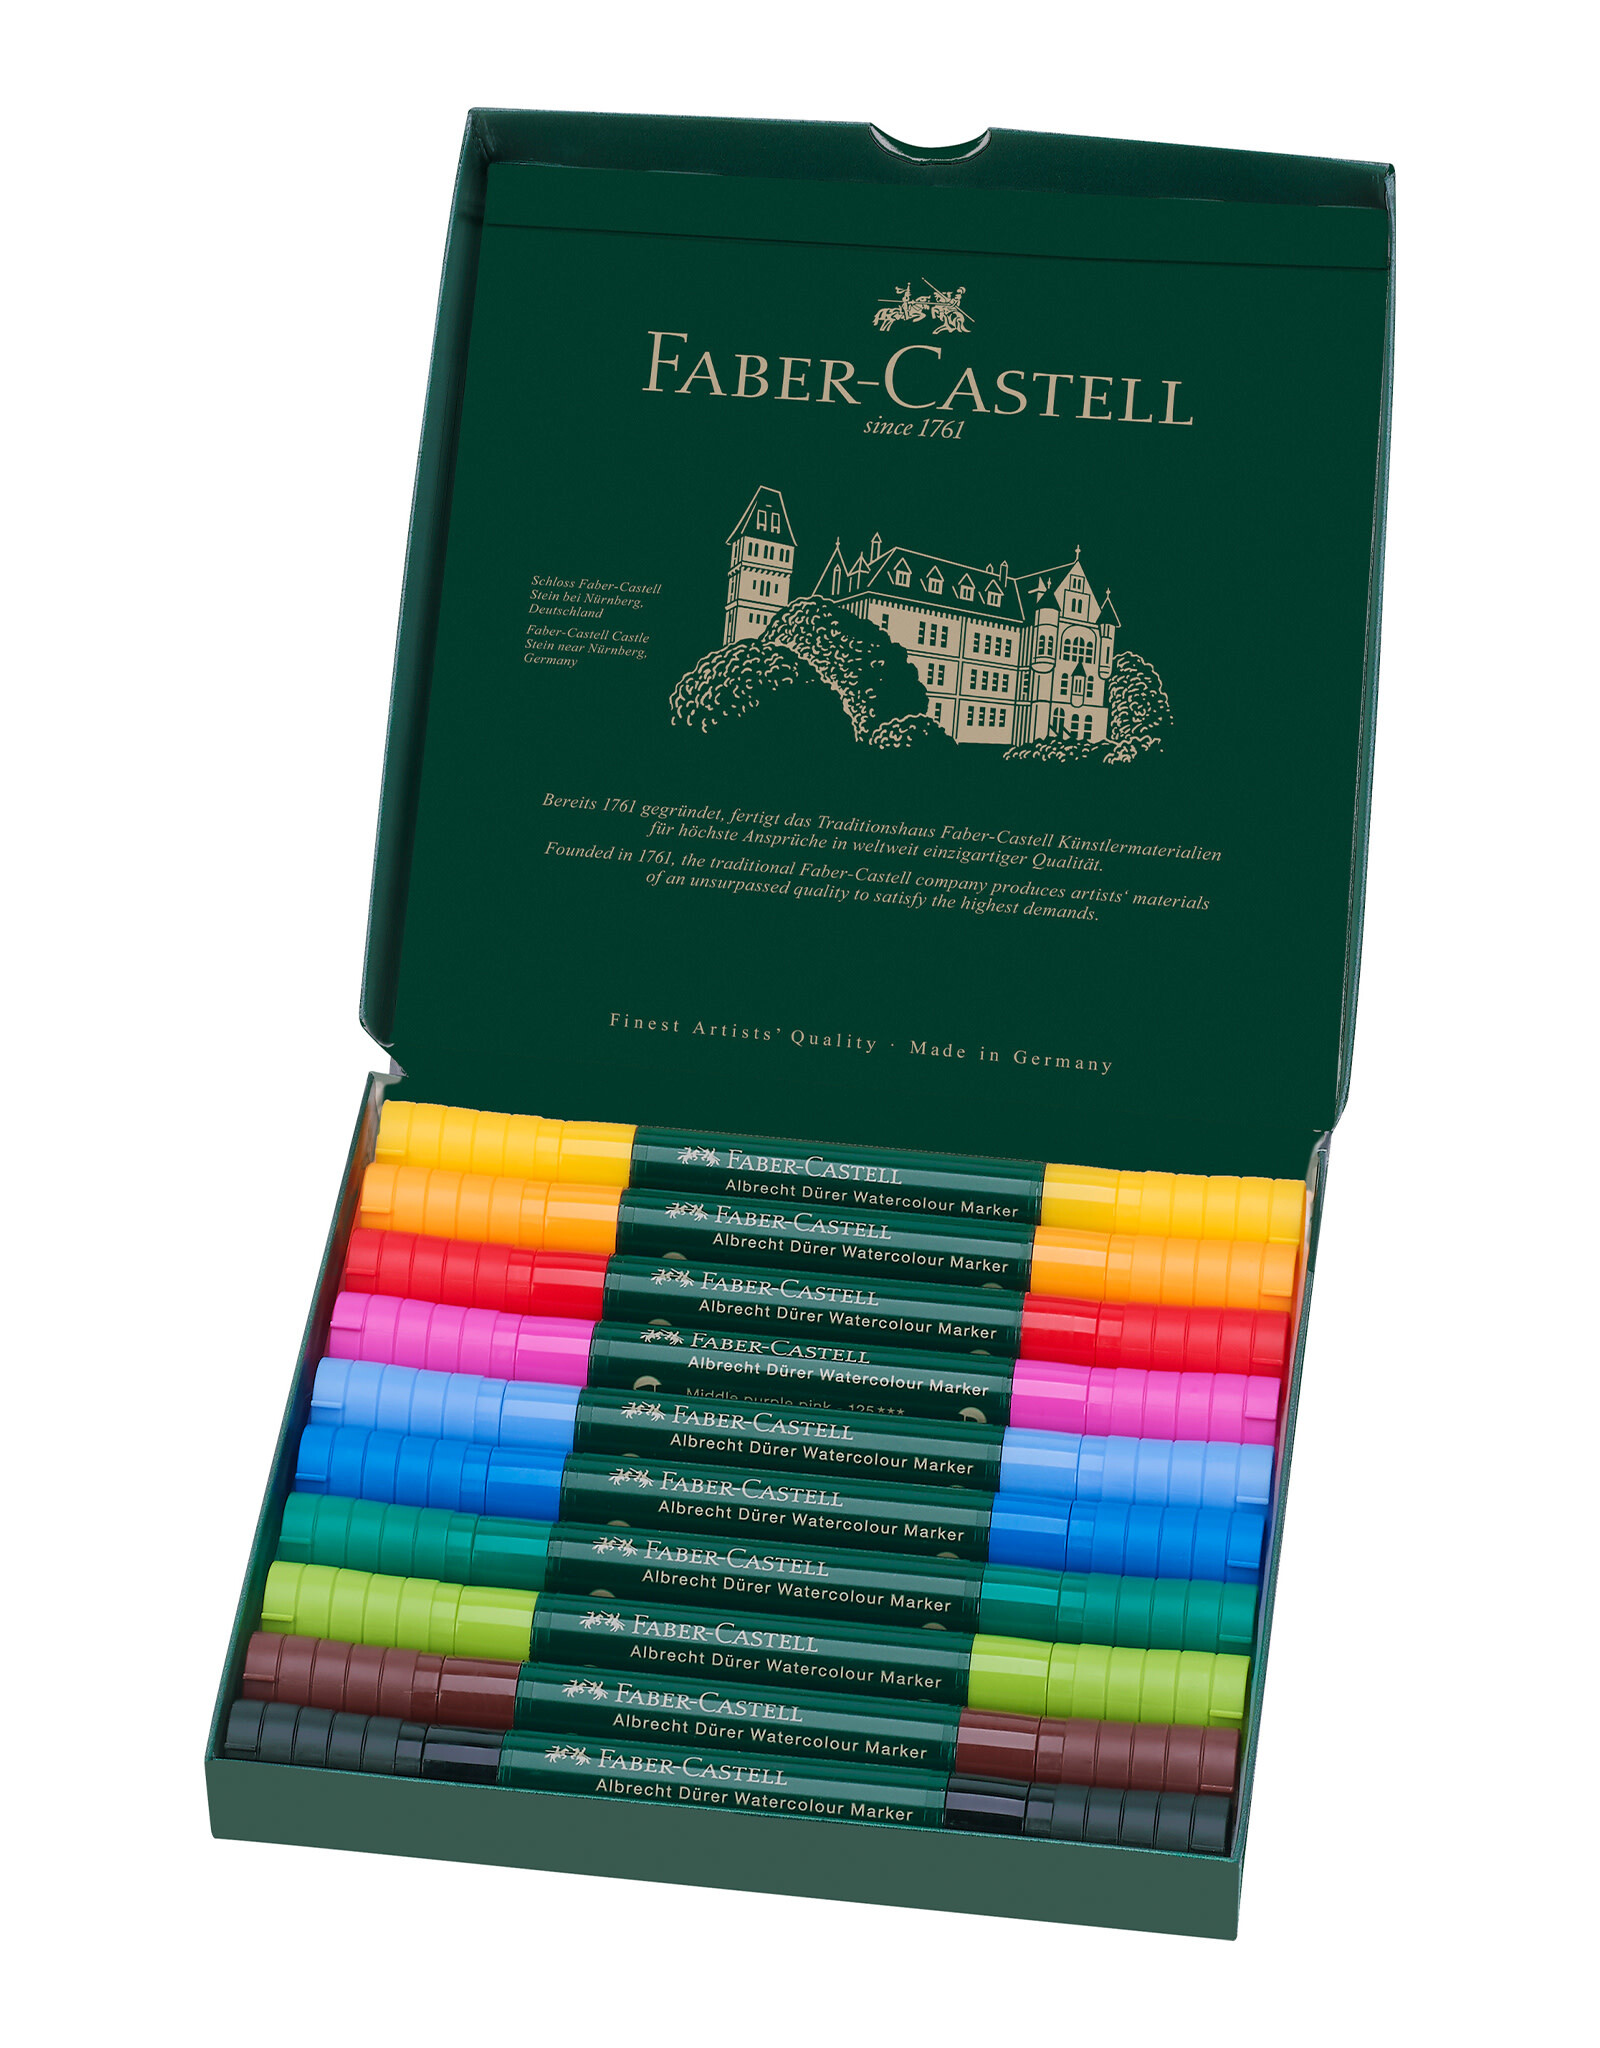 FABER-CASTELL Albrecht Durer Watercolor Markers, Gift Box of 10